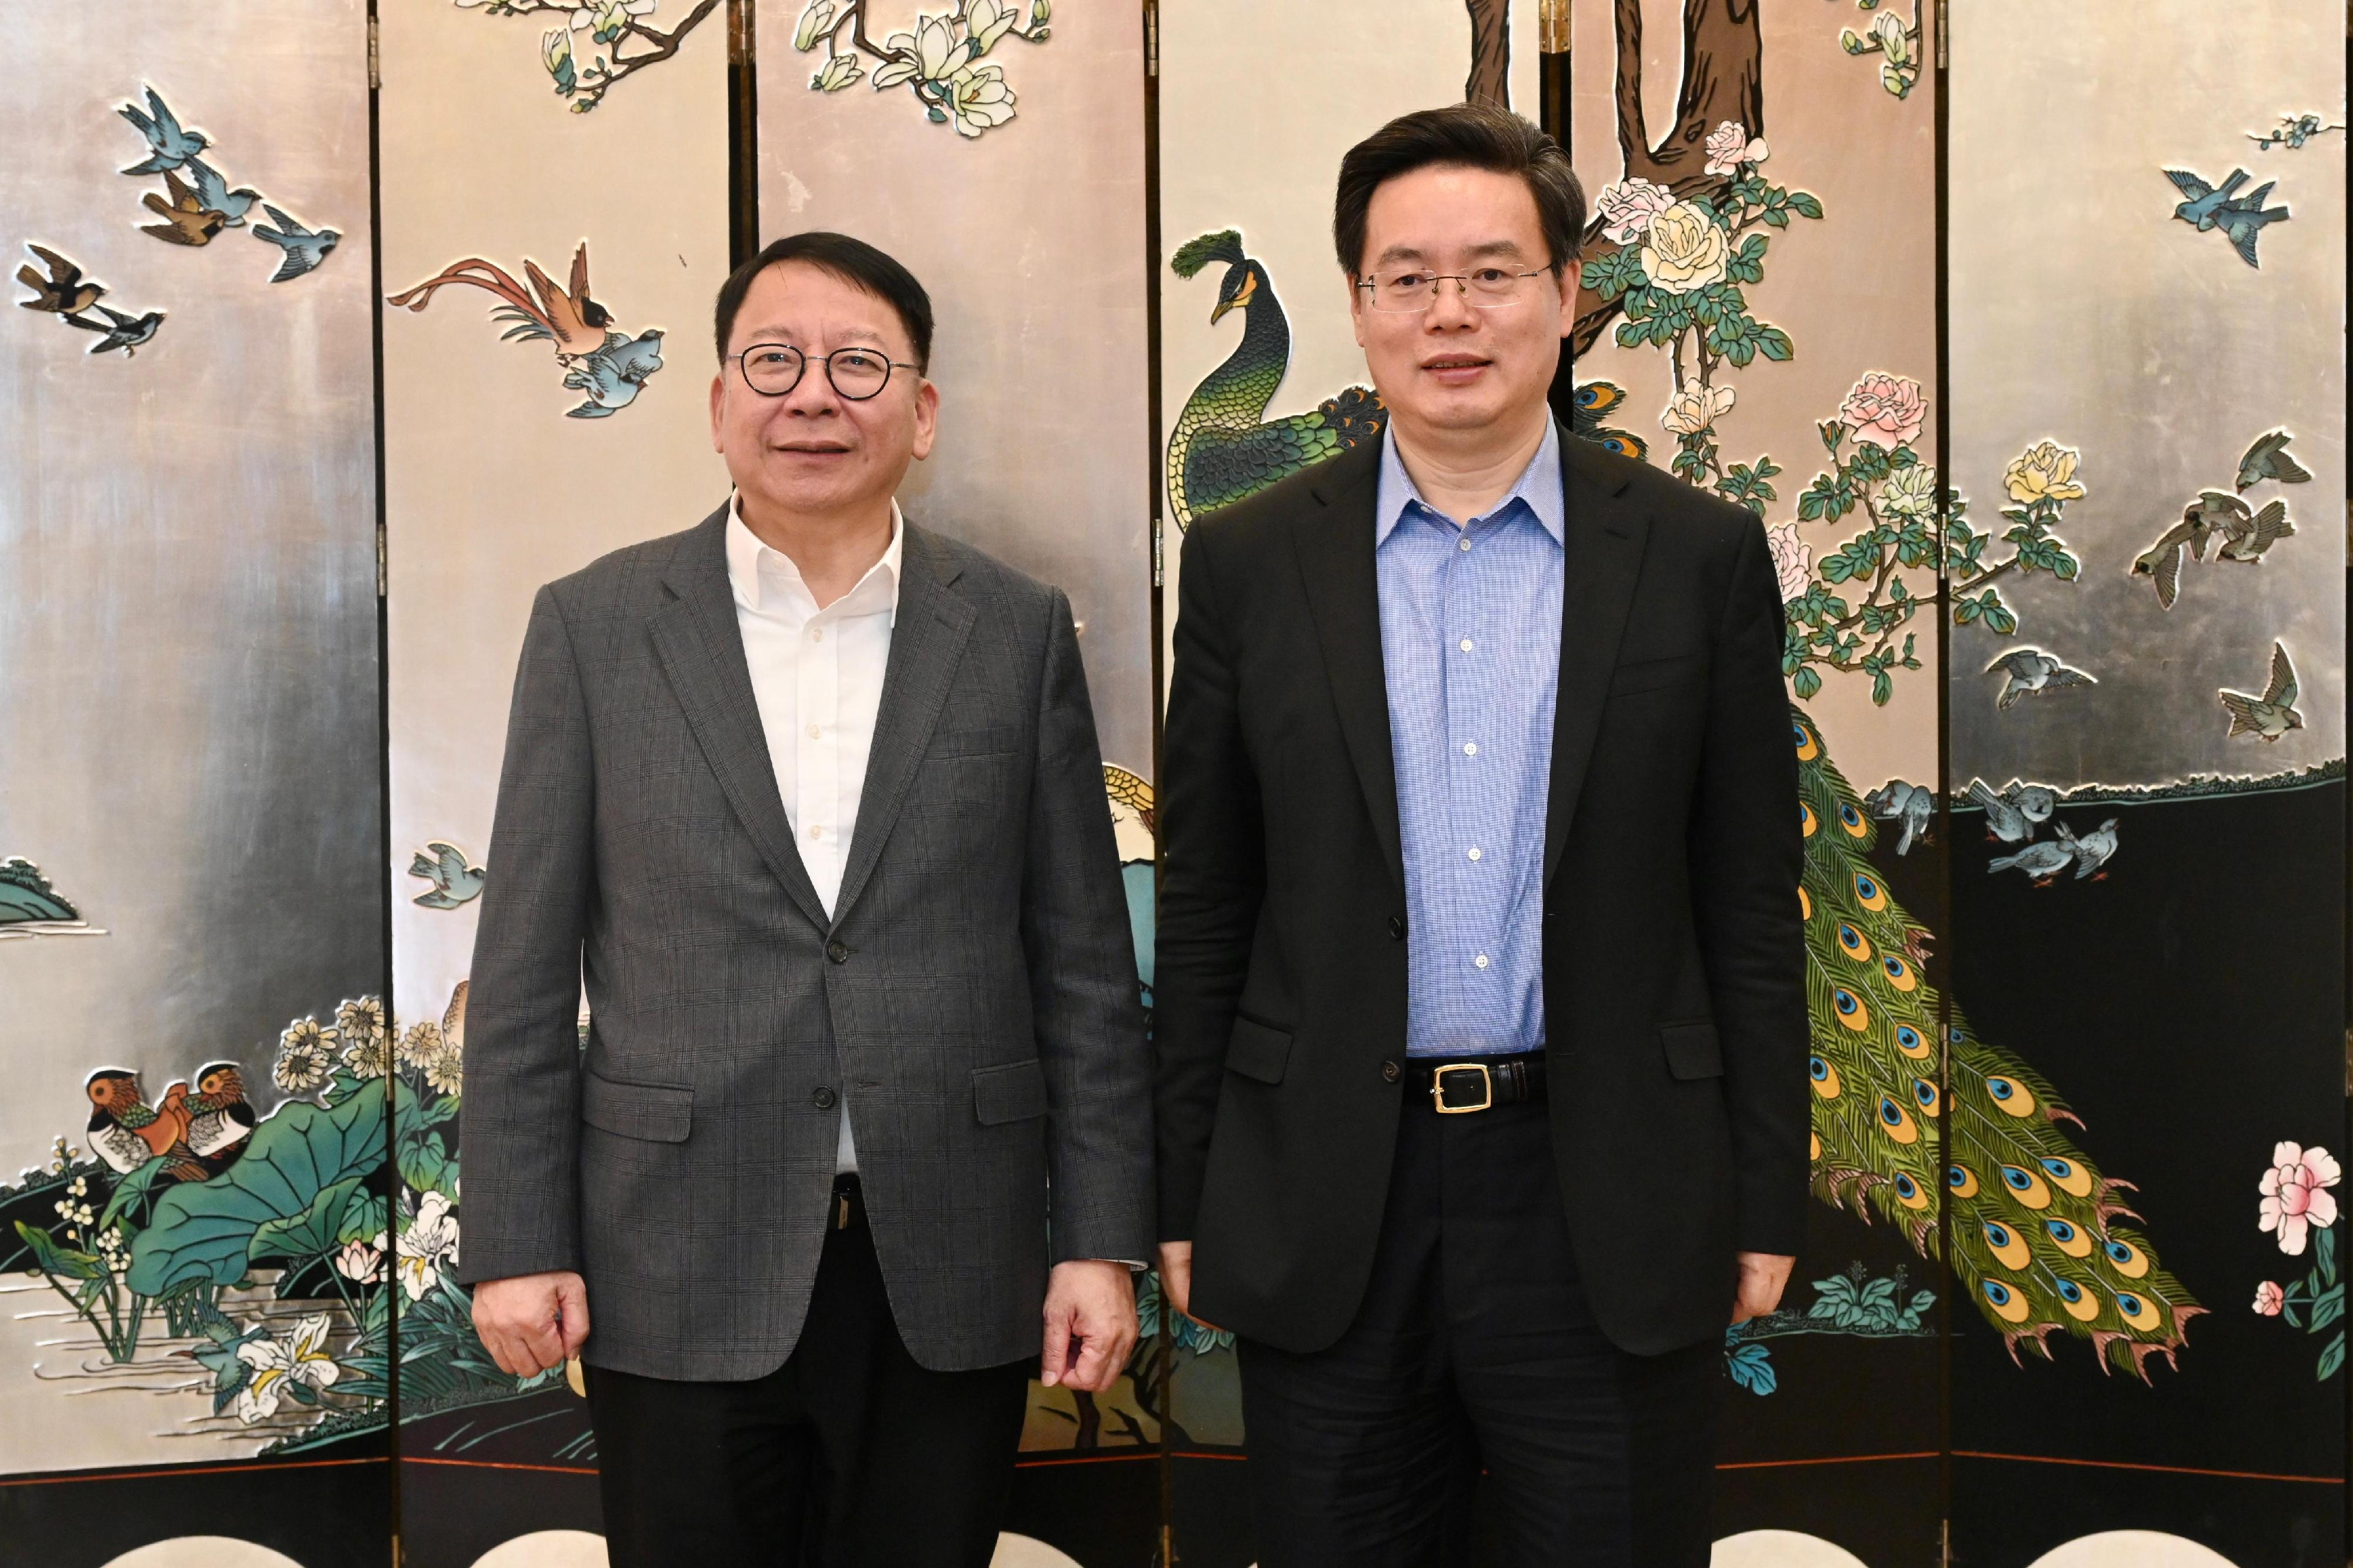 The Chief Secretary for Administration, Mr Chan Kwok-ki, today (January 10) visited Shenzhen and concluded his visit to Mainland cities of the Guangdong-Hong Kong-Macao Greater Bay Area. Photo shows Mr Chan (left) meeting with the Mayor of the Shenzhen Municipal People’s Government, Mr Qin Weizhong (right).